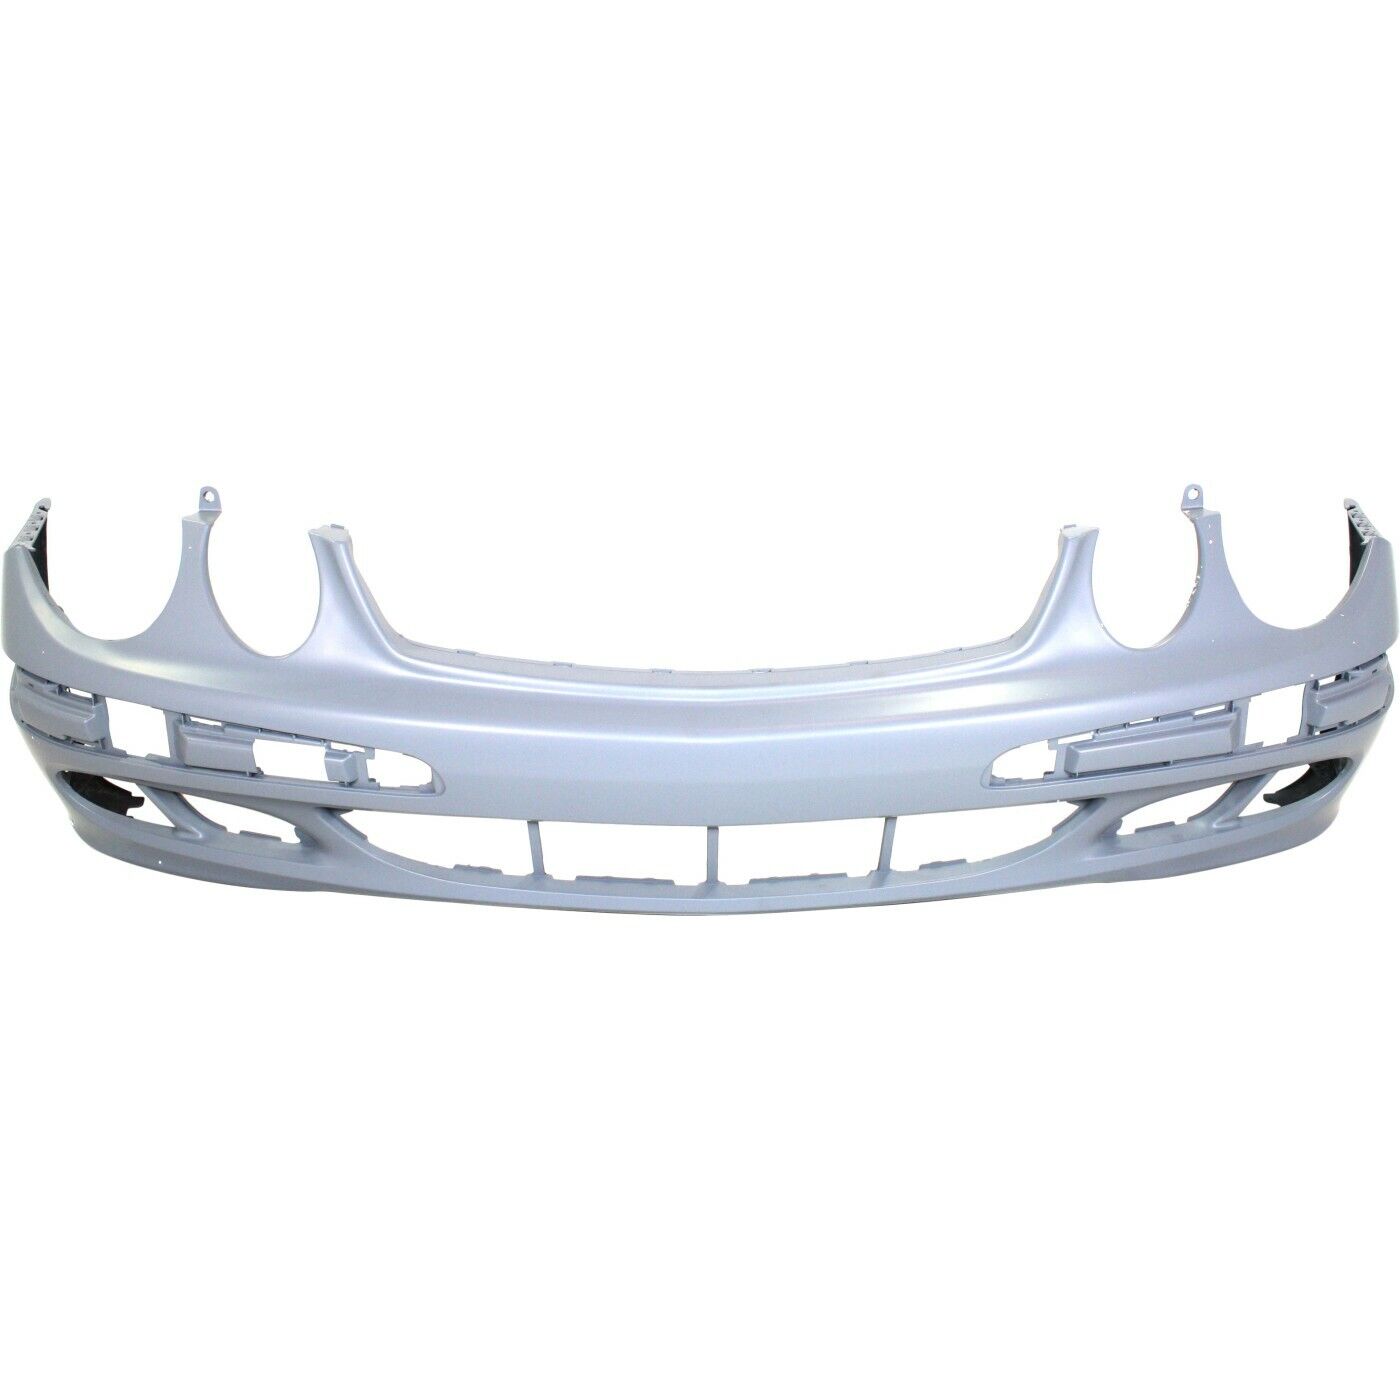 NEW Primed Front Bumper Cover Replacement for 2003-2006 Mercedes E320 350 500